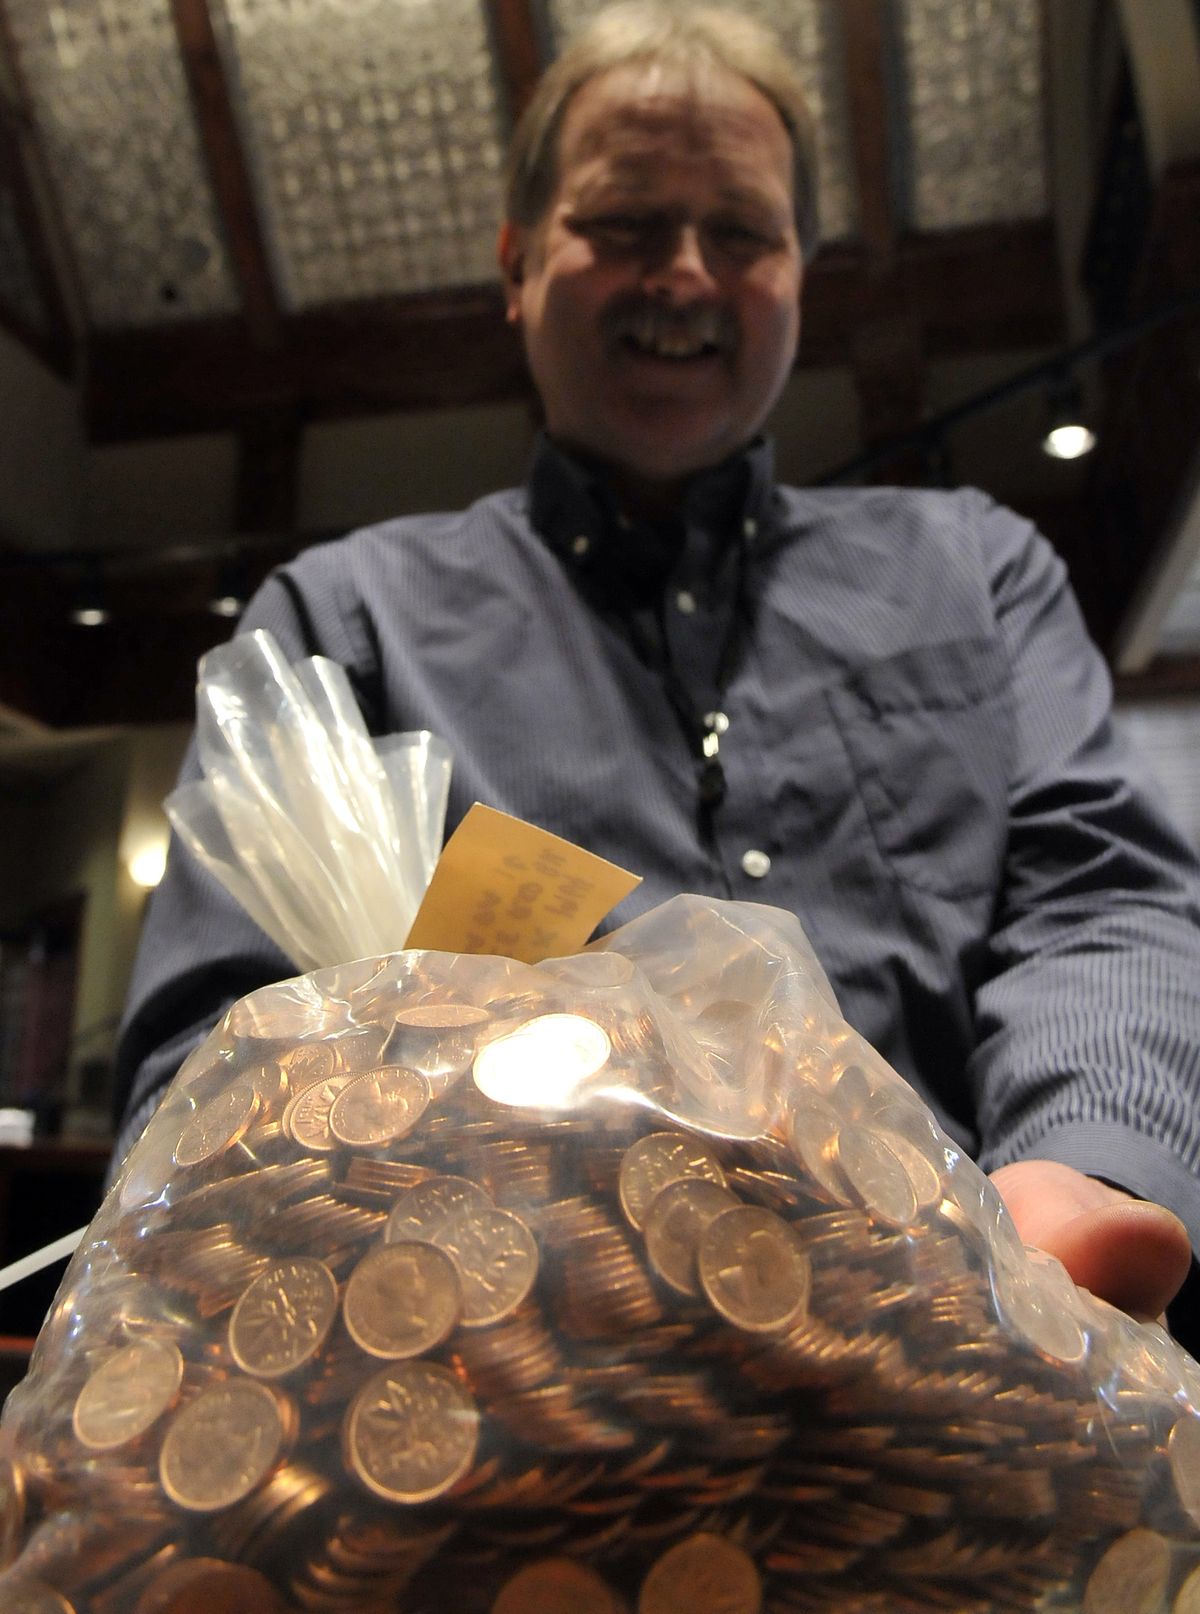 Court Peterson, who sells precious metals and coins, holds a bag of 1964 Canadian pennies at Coins Plus in Spokane on Friday. The coin will soon go out of production. (PHotos by Jesse Tinsley)